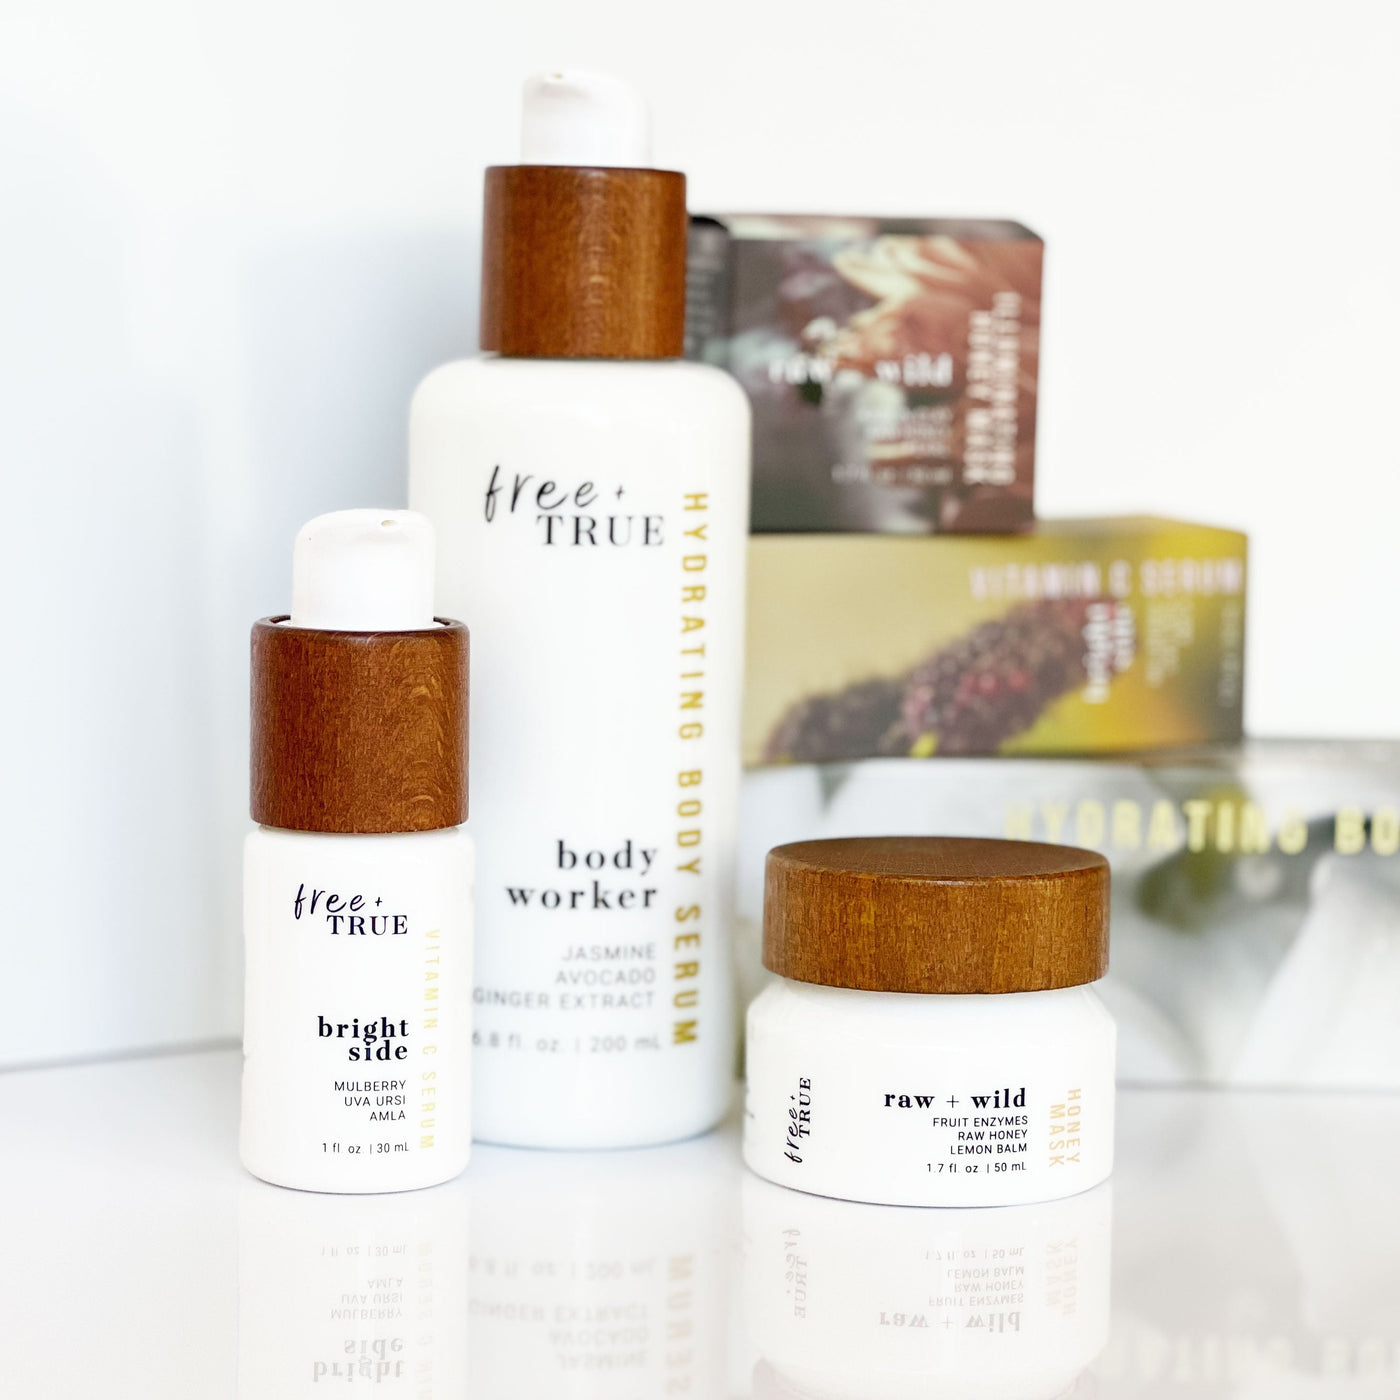 Free + True and Laurel & Reed subscription box